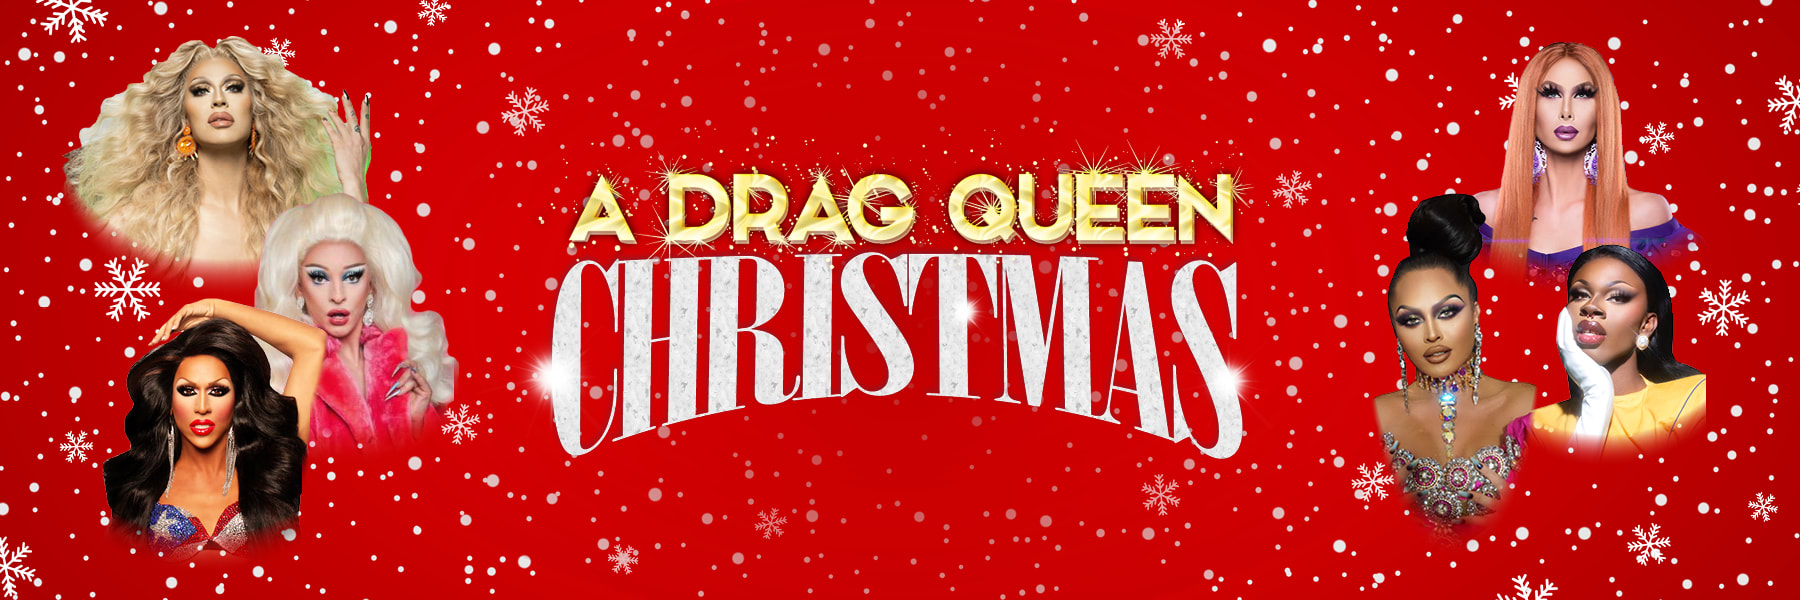 A Drag Queen Christmas Official Box Office BroadwaySF